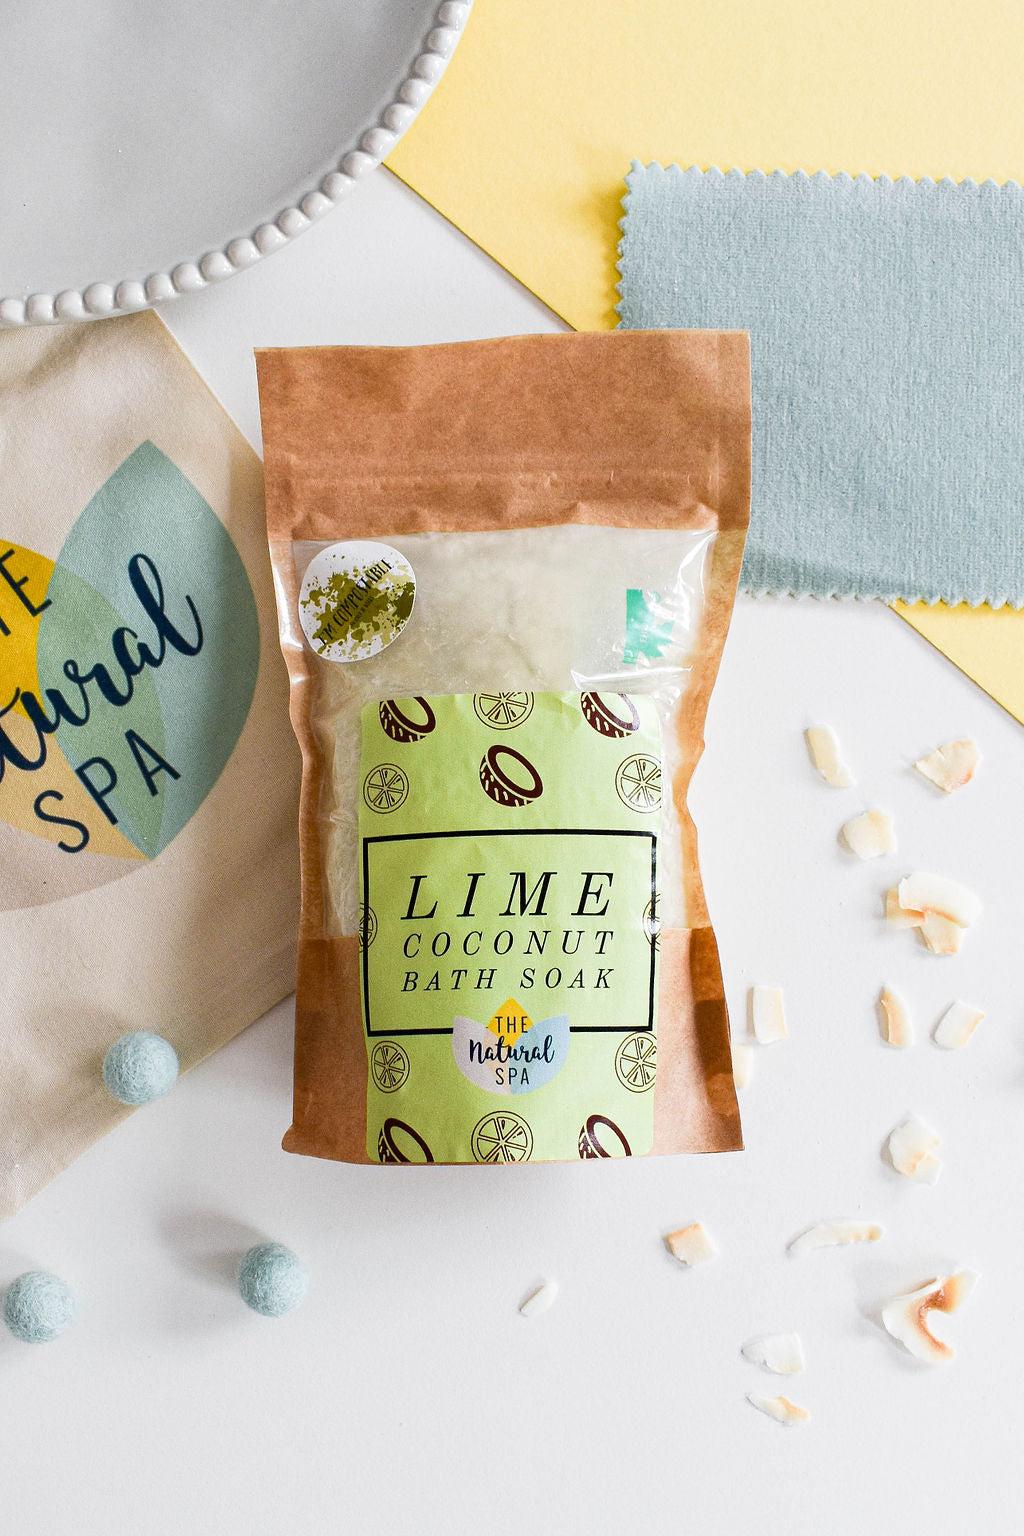 225g Lime and Coconut Bath Soak – Compostable pouch